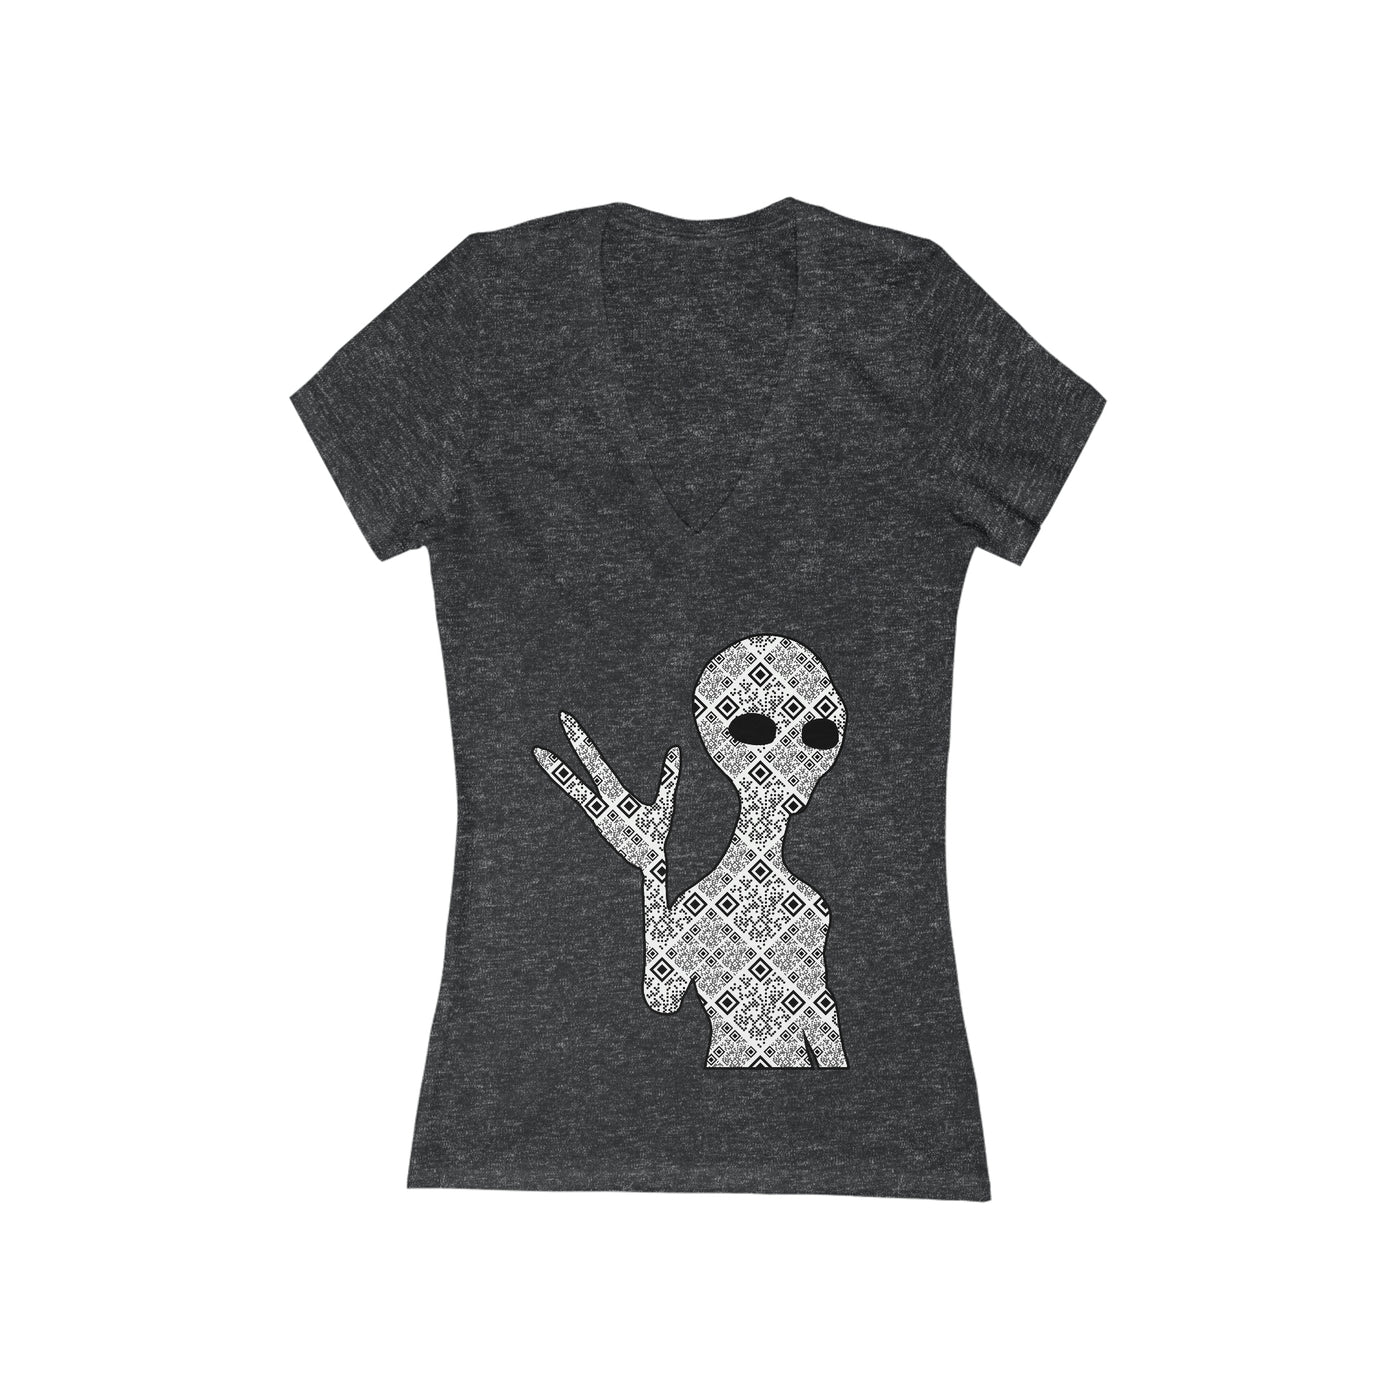 XR Reality Collection: Outta This World Alien (Women's) Adult Fitted V-Neck T-Shirt